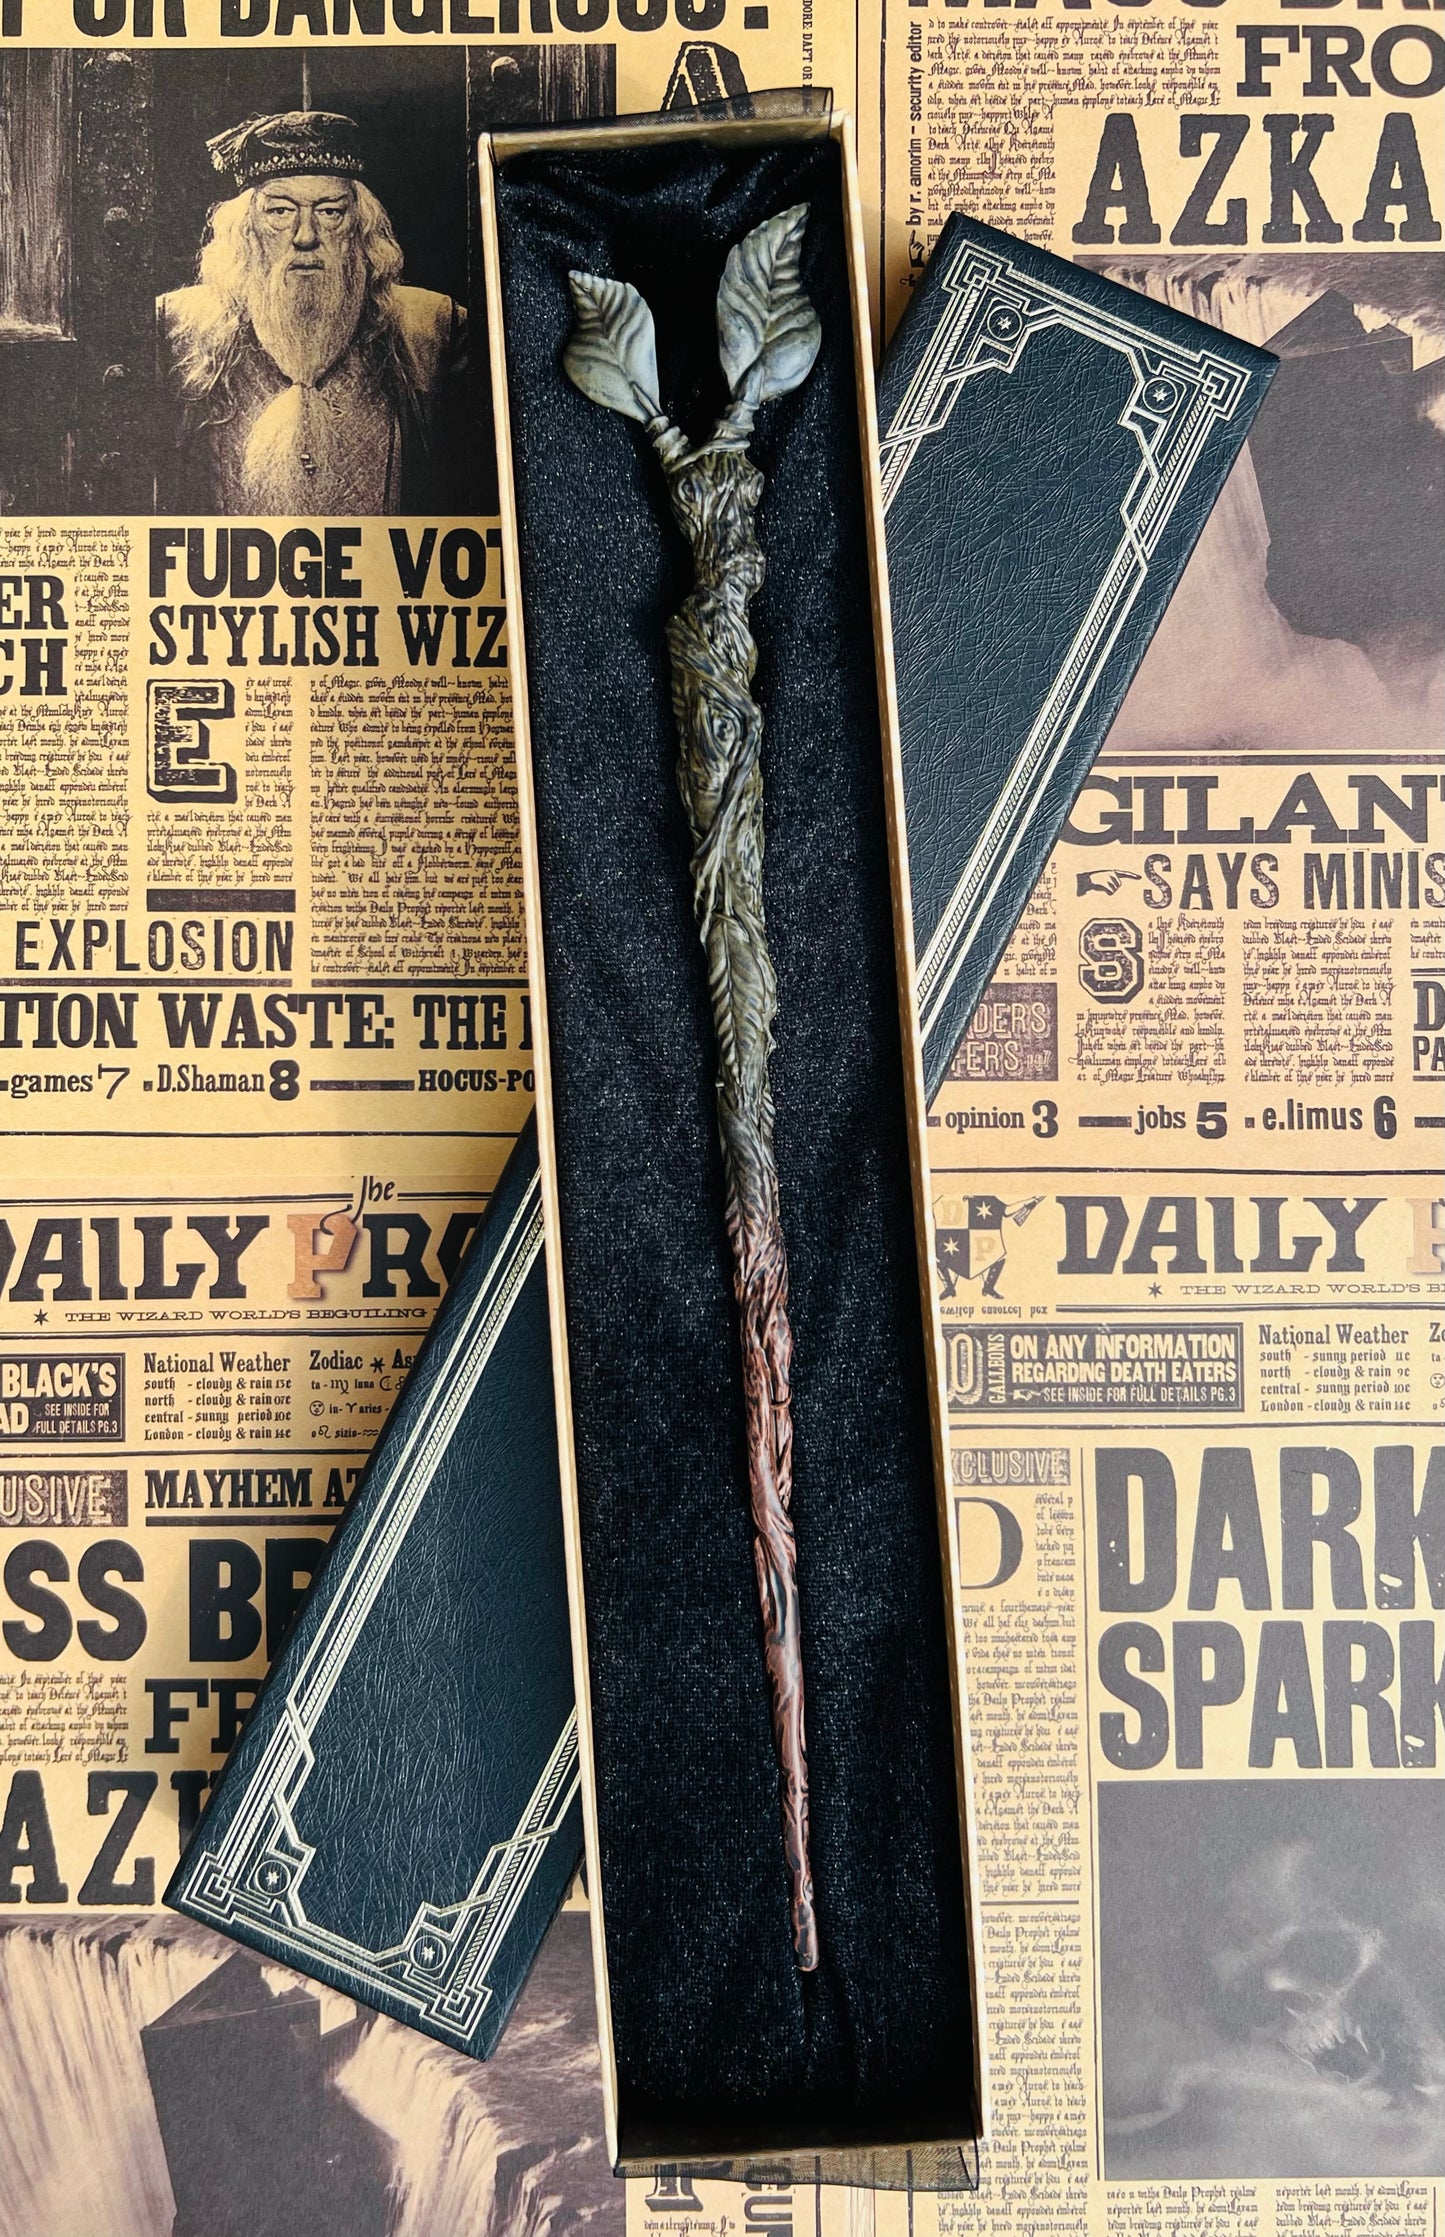 The Bowtruckle Magic Wand